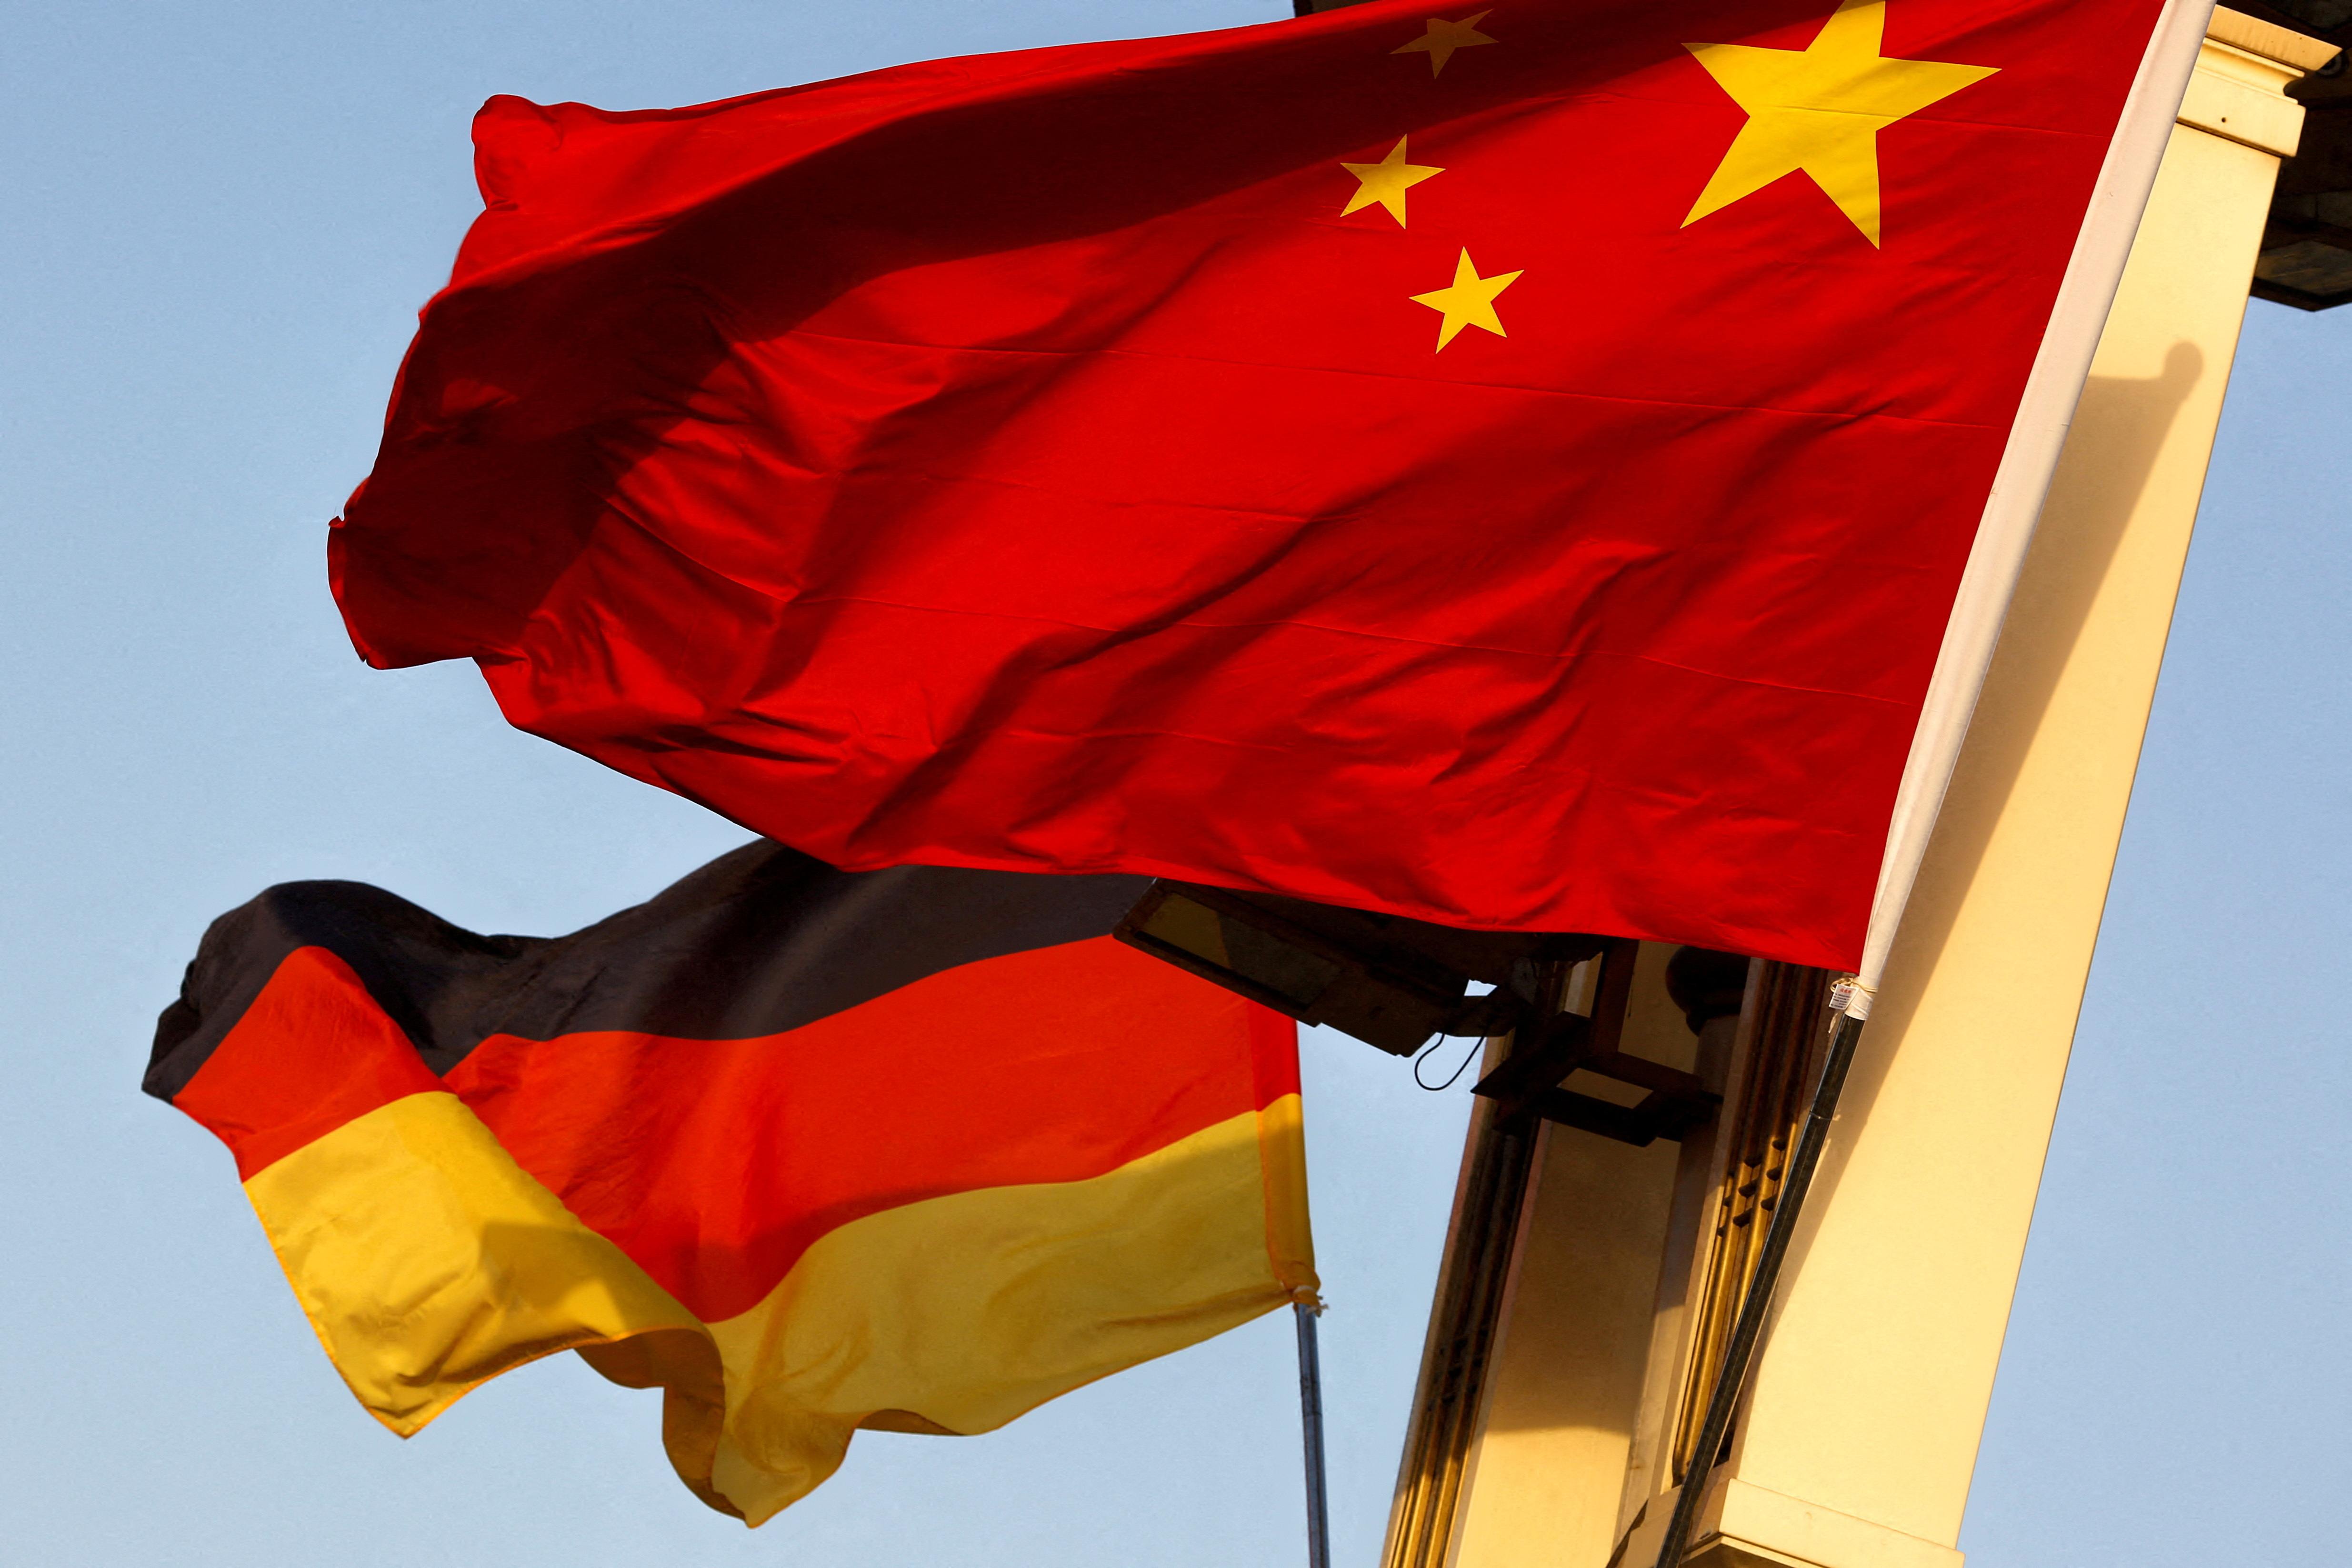 German and Chinese national flags fly in Tiananmen Square in Beijing